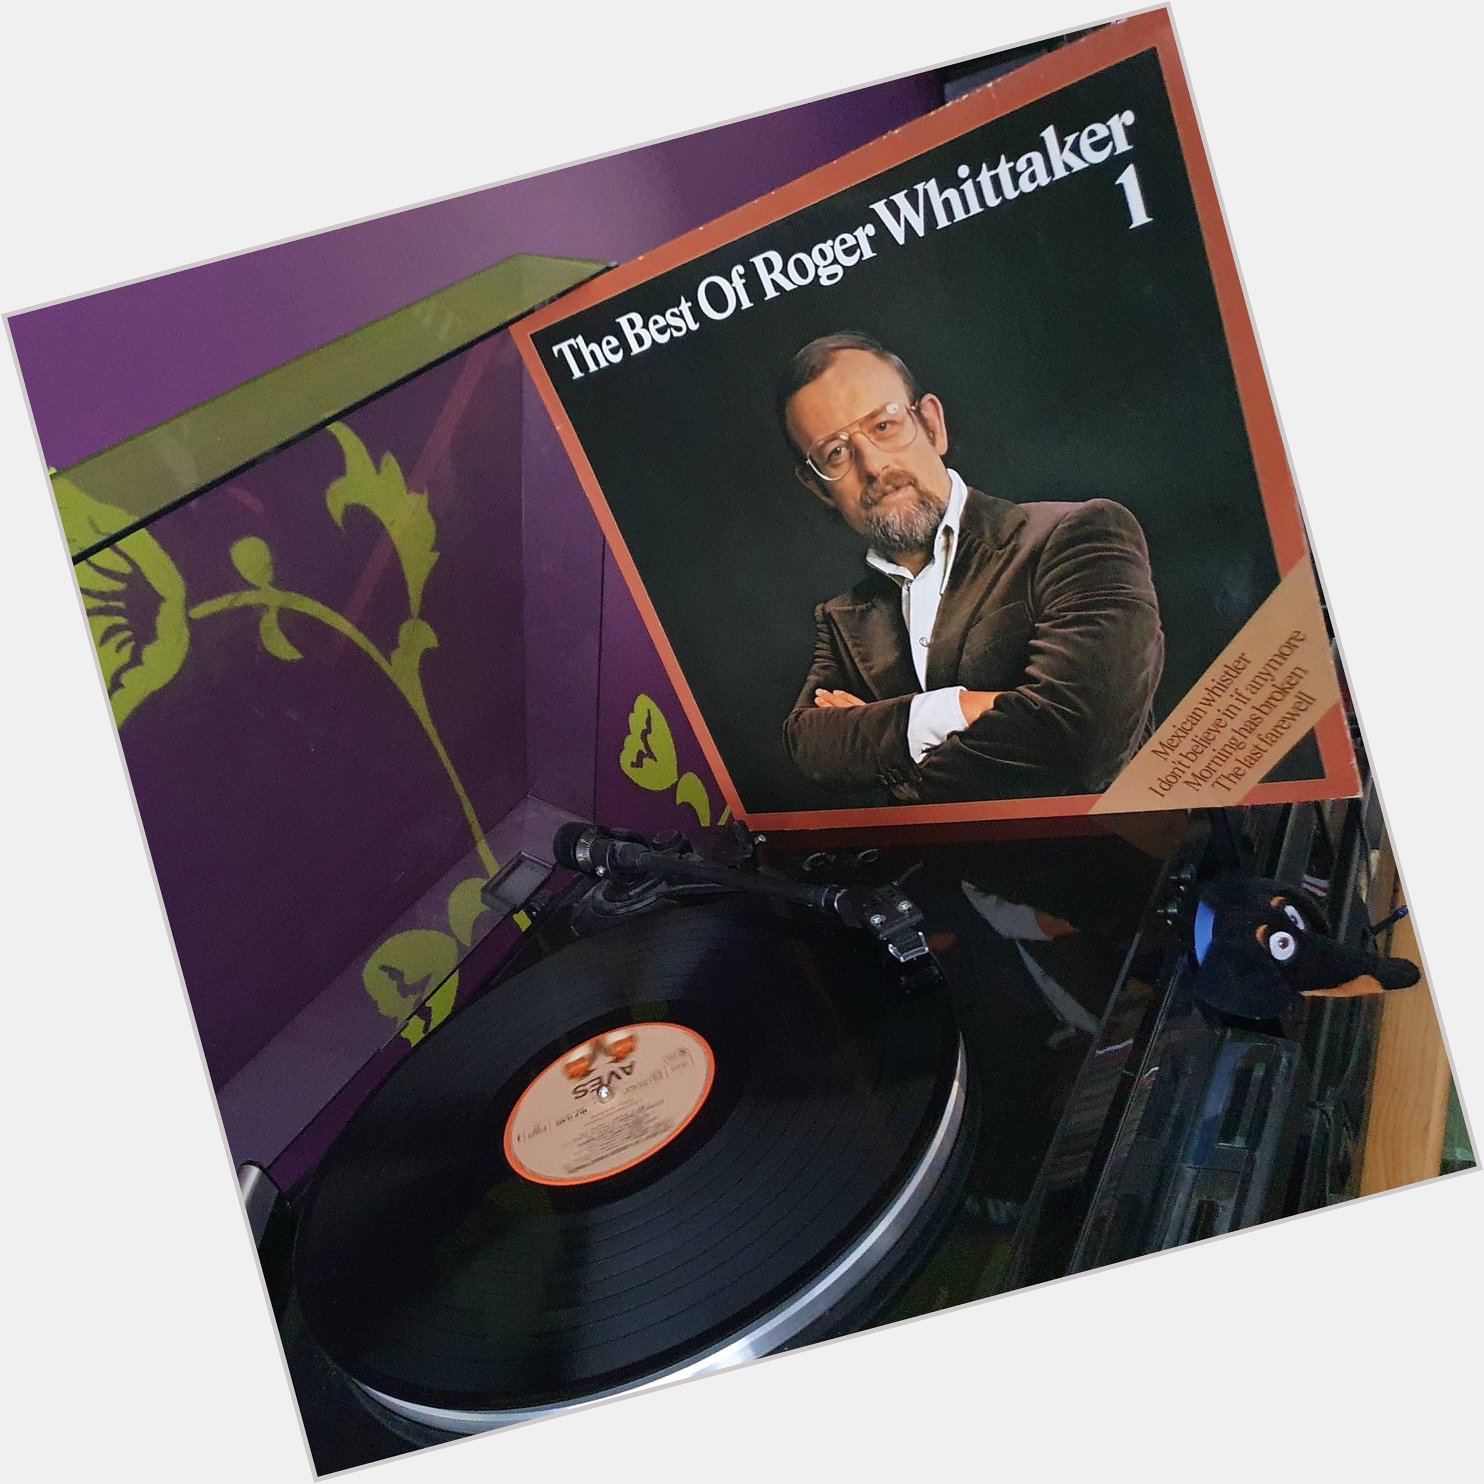 Happy Birthday Roger Whittaker *84*!
The Best of 1 (AVES/1976)   